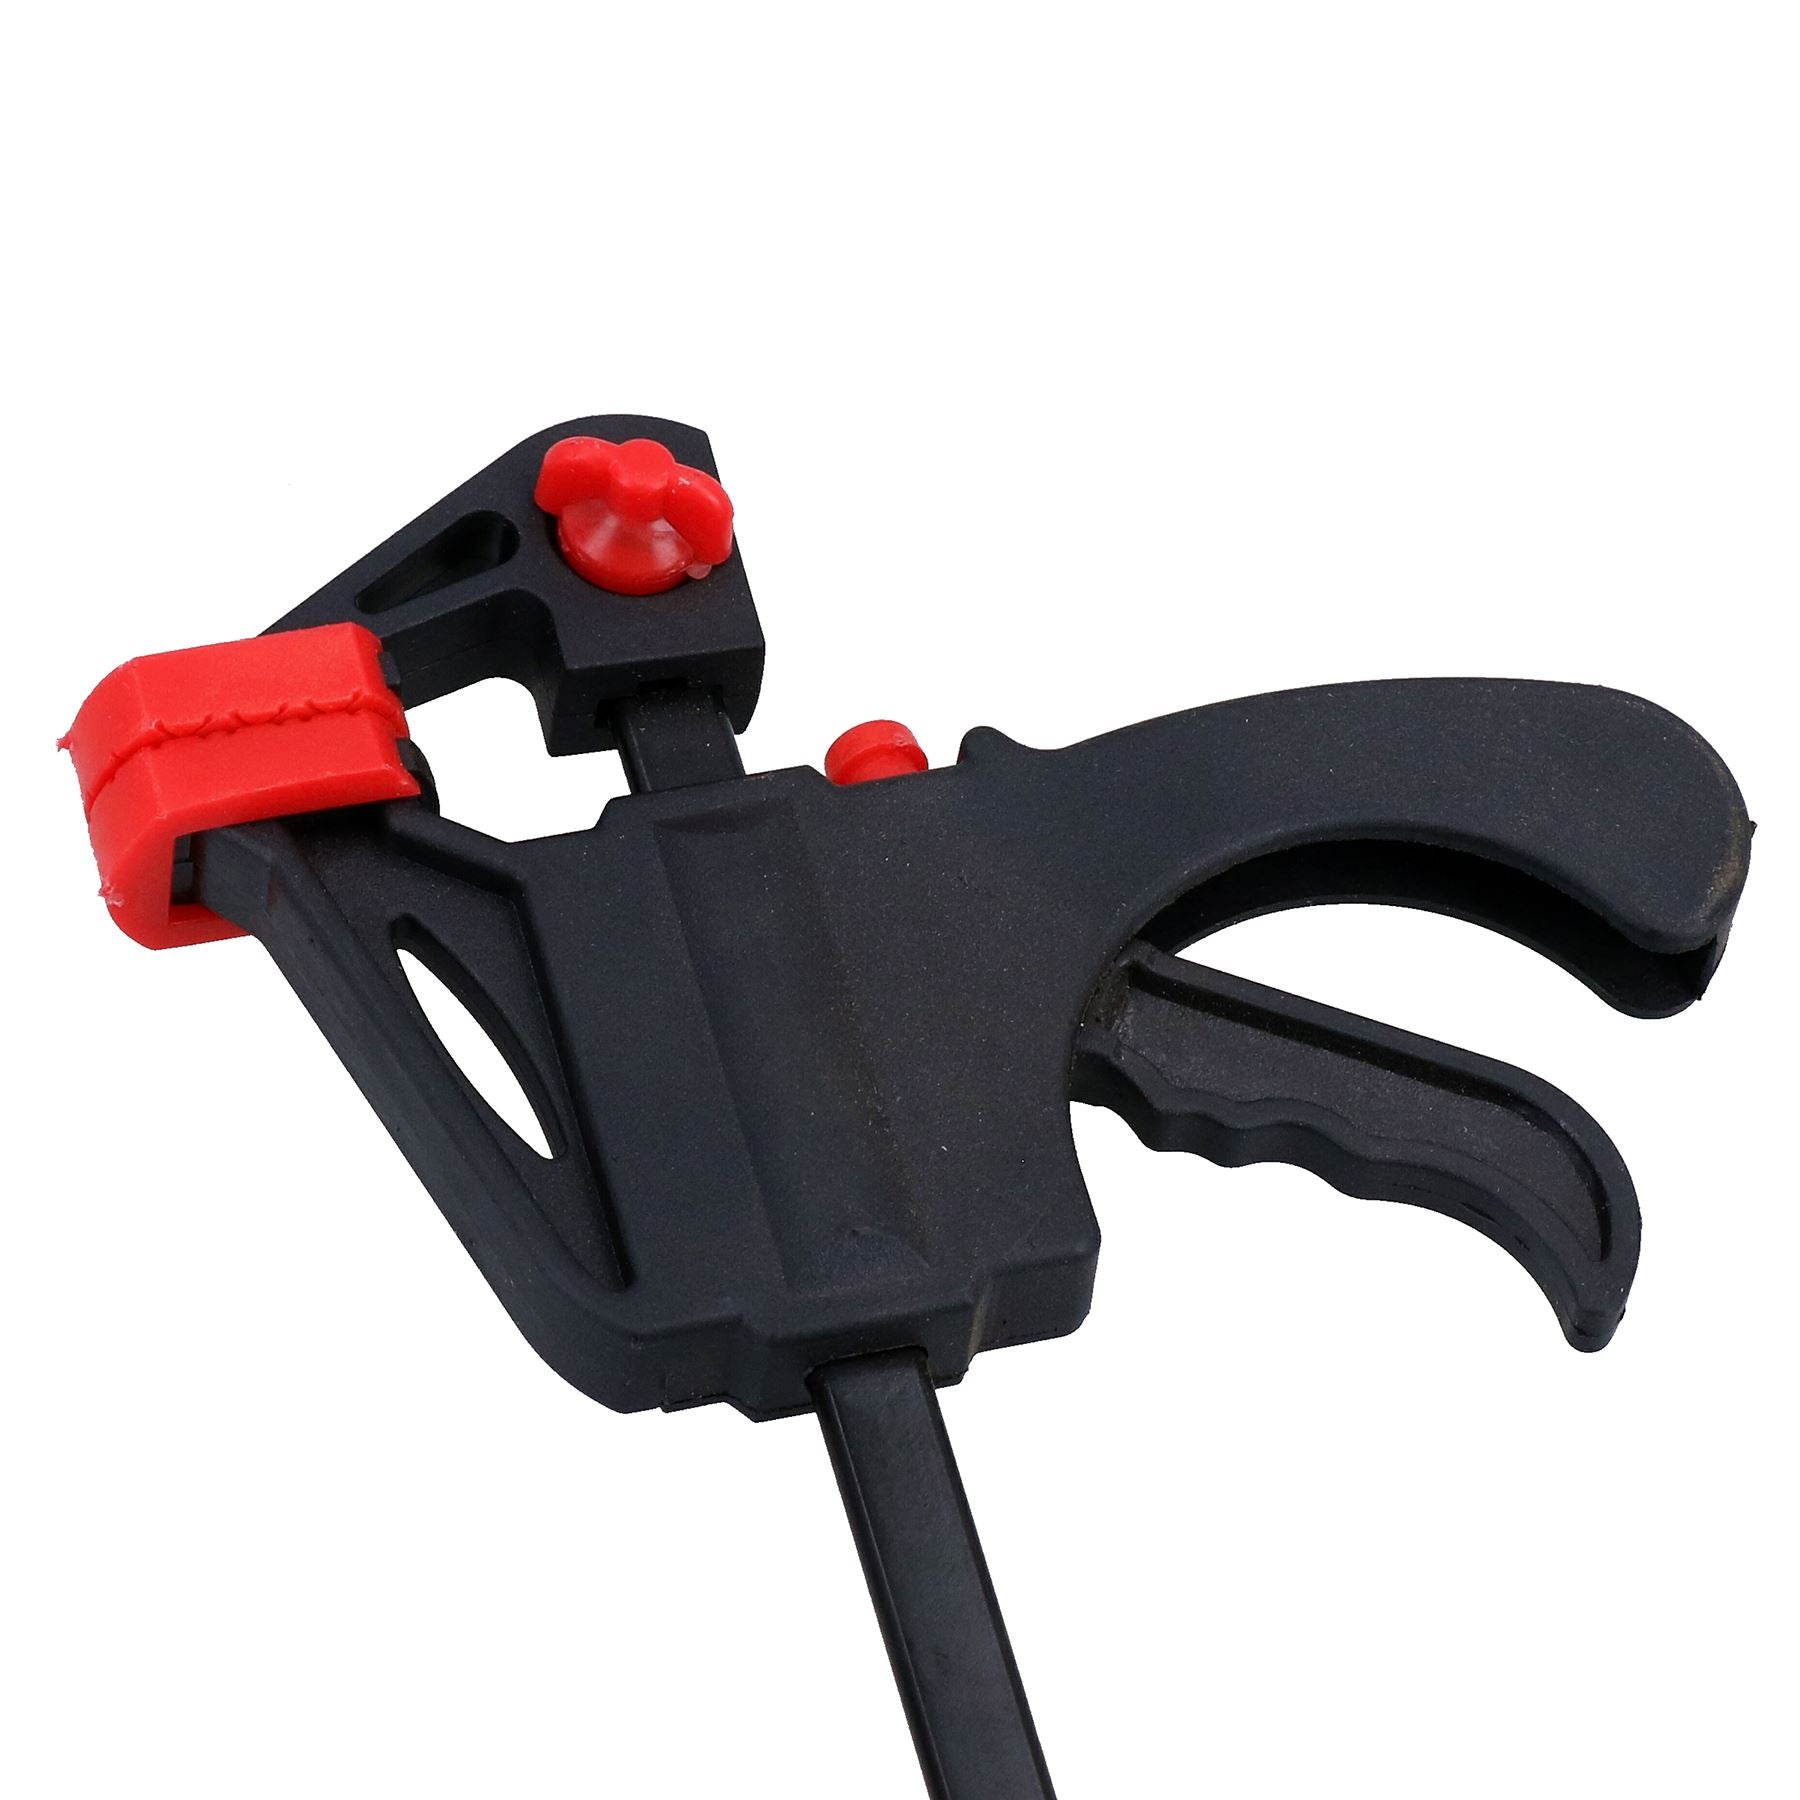 4" / 100mm Quick Release Rapid Bar Clamp Holder Grip Spreader Speed Clamps